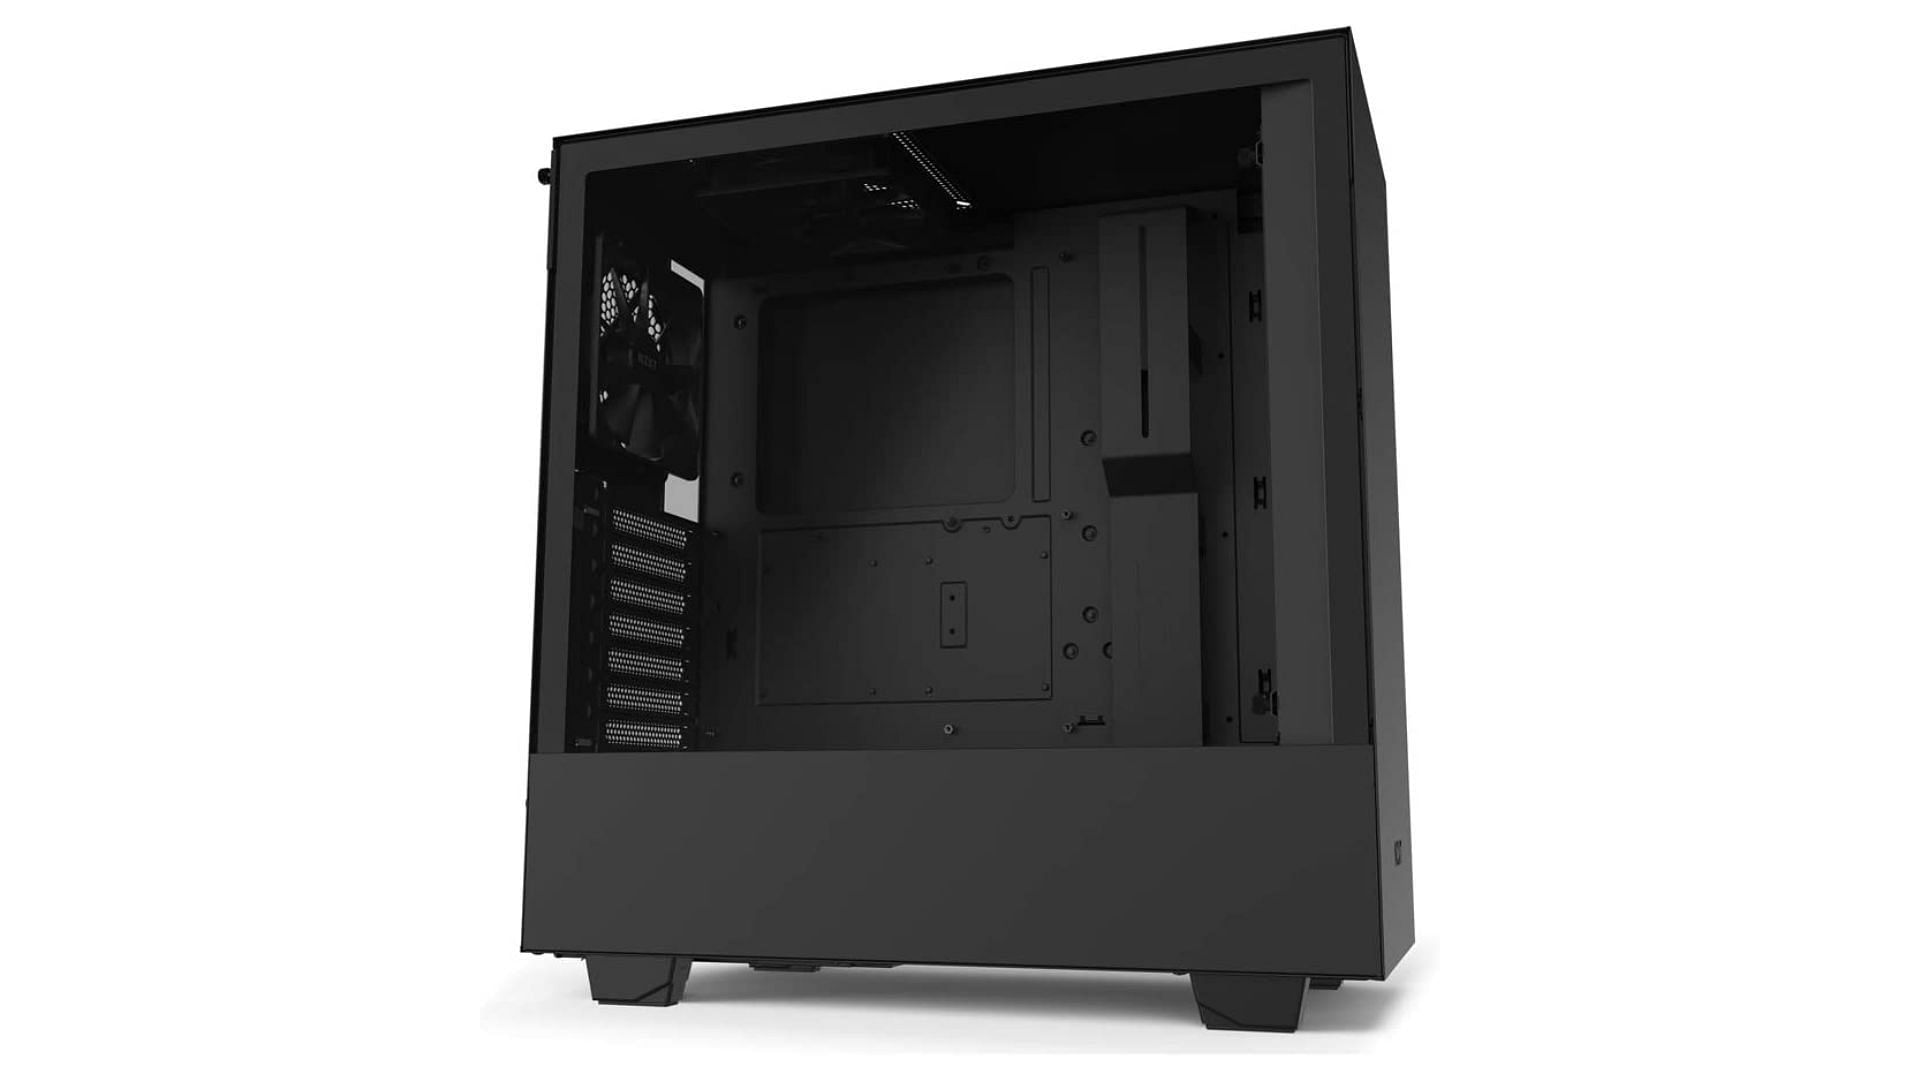 H510 compact ATX mid-tower PC gaming case (Image via Amazon)